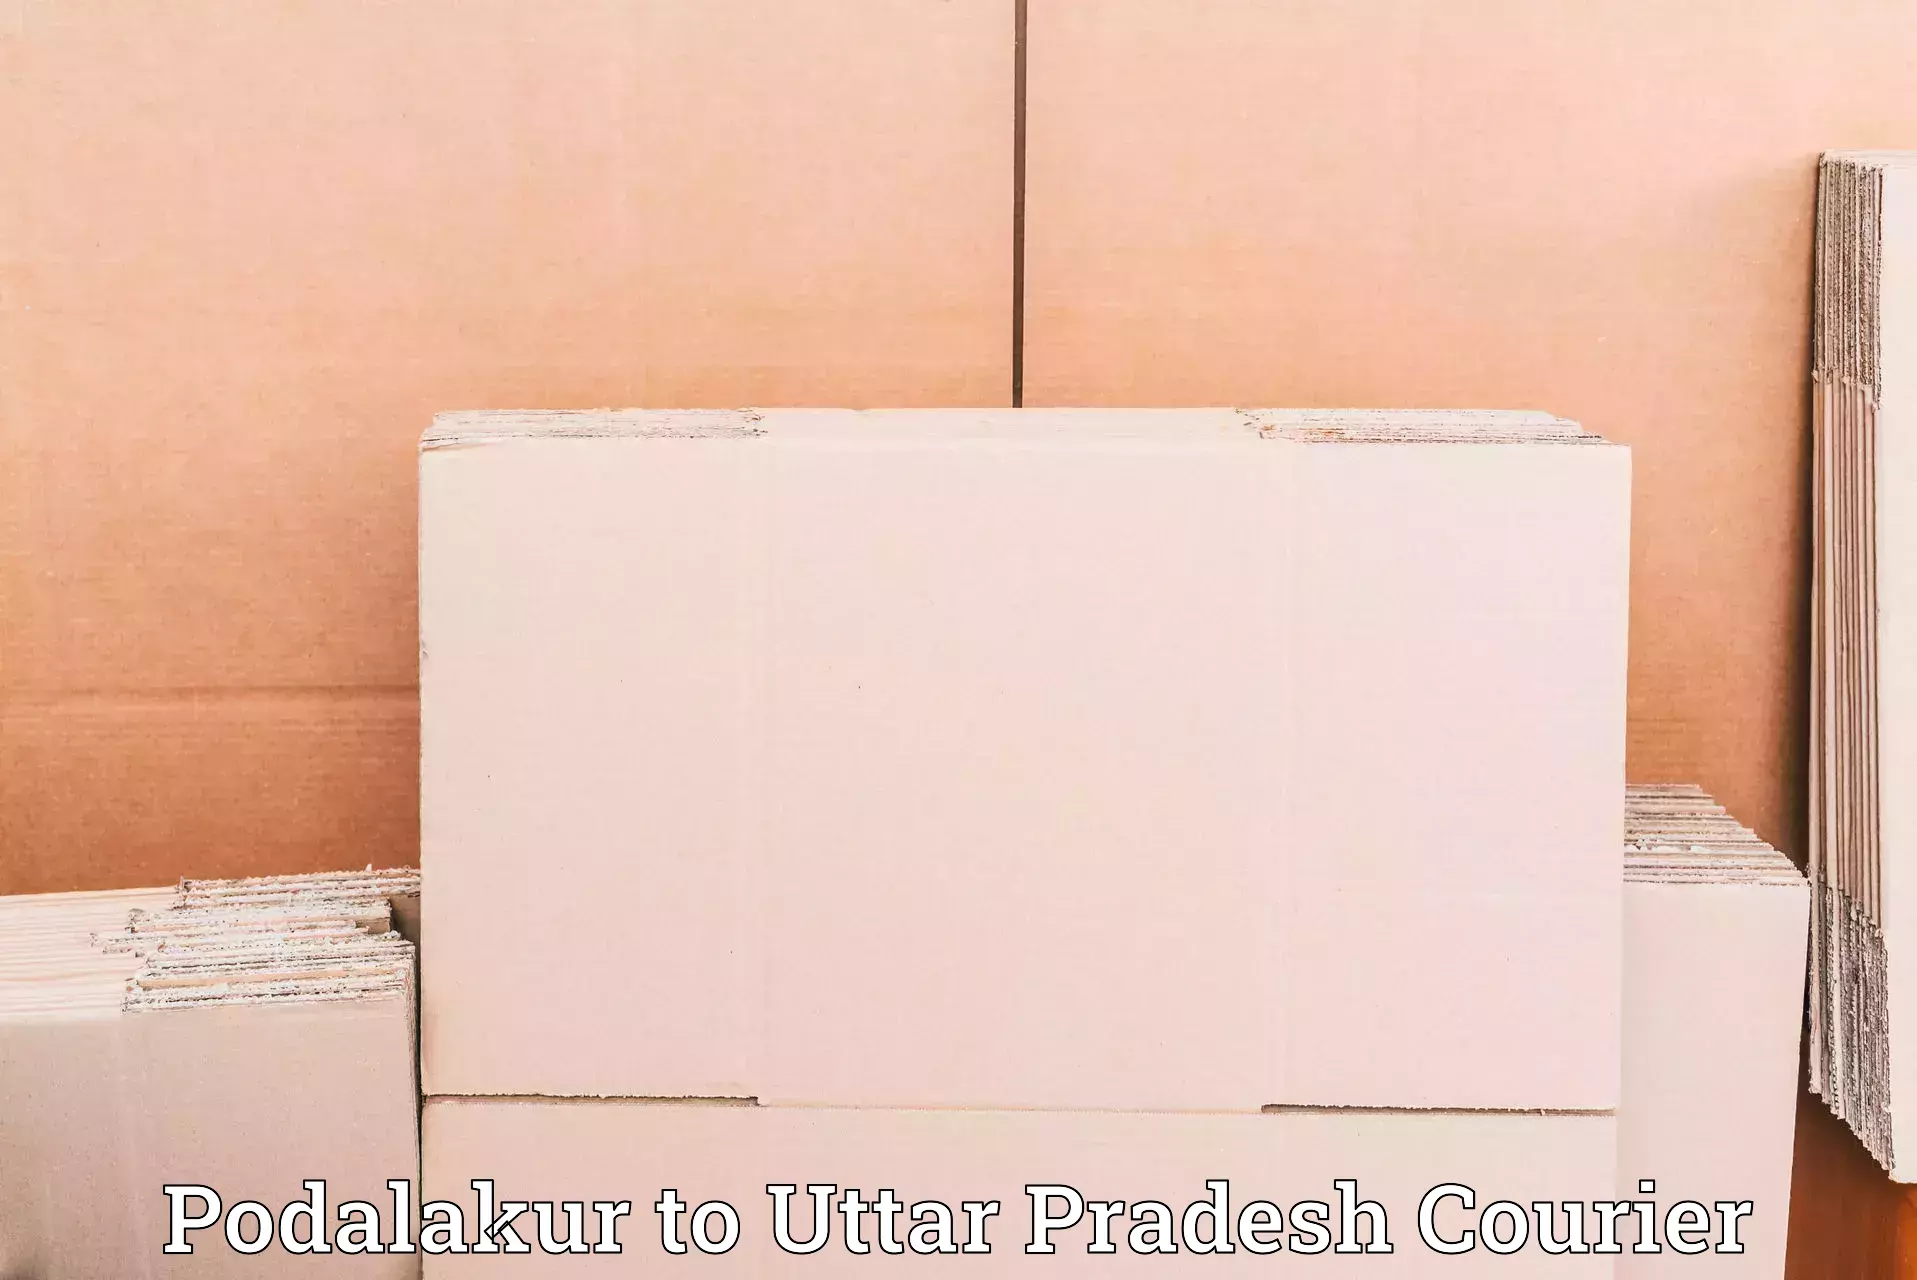 High-priority parcel service Podalakur to Bareilly